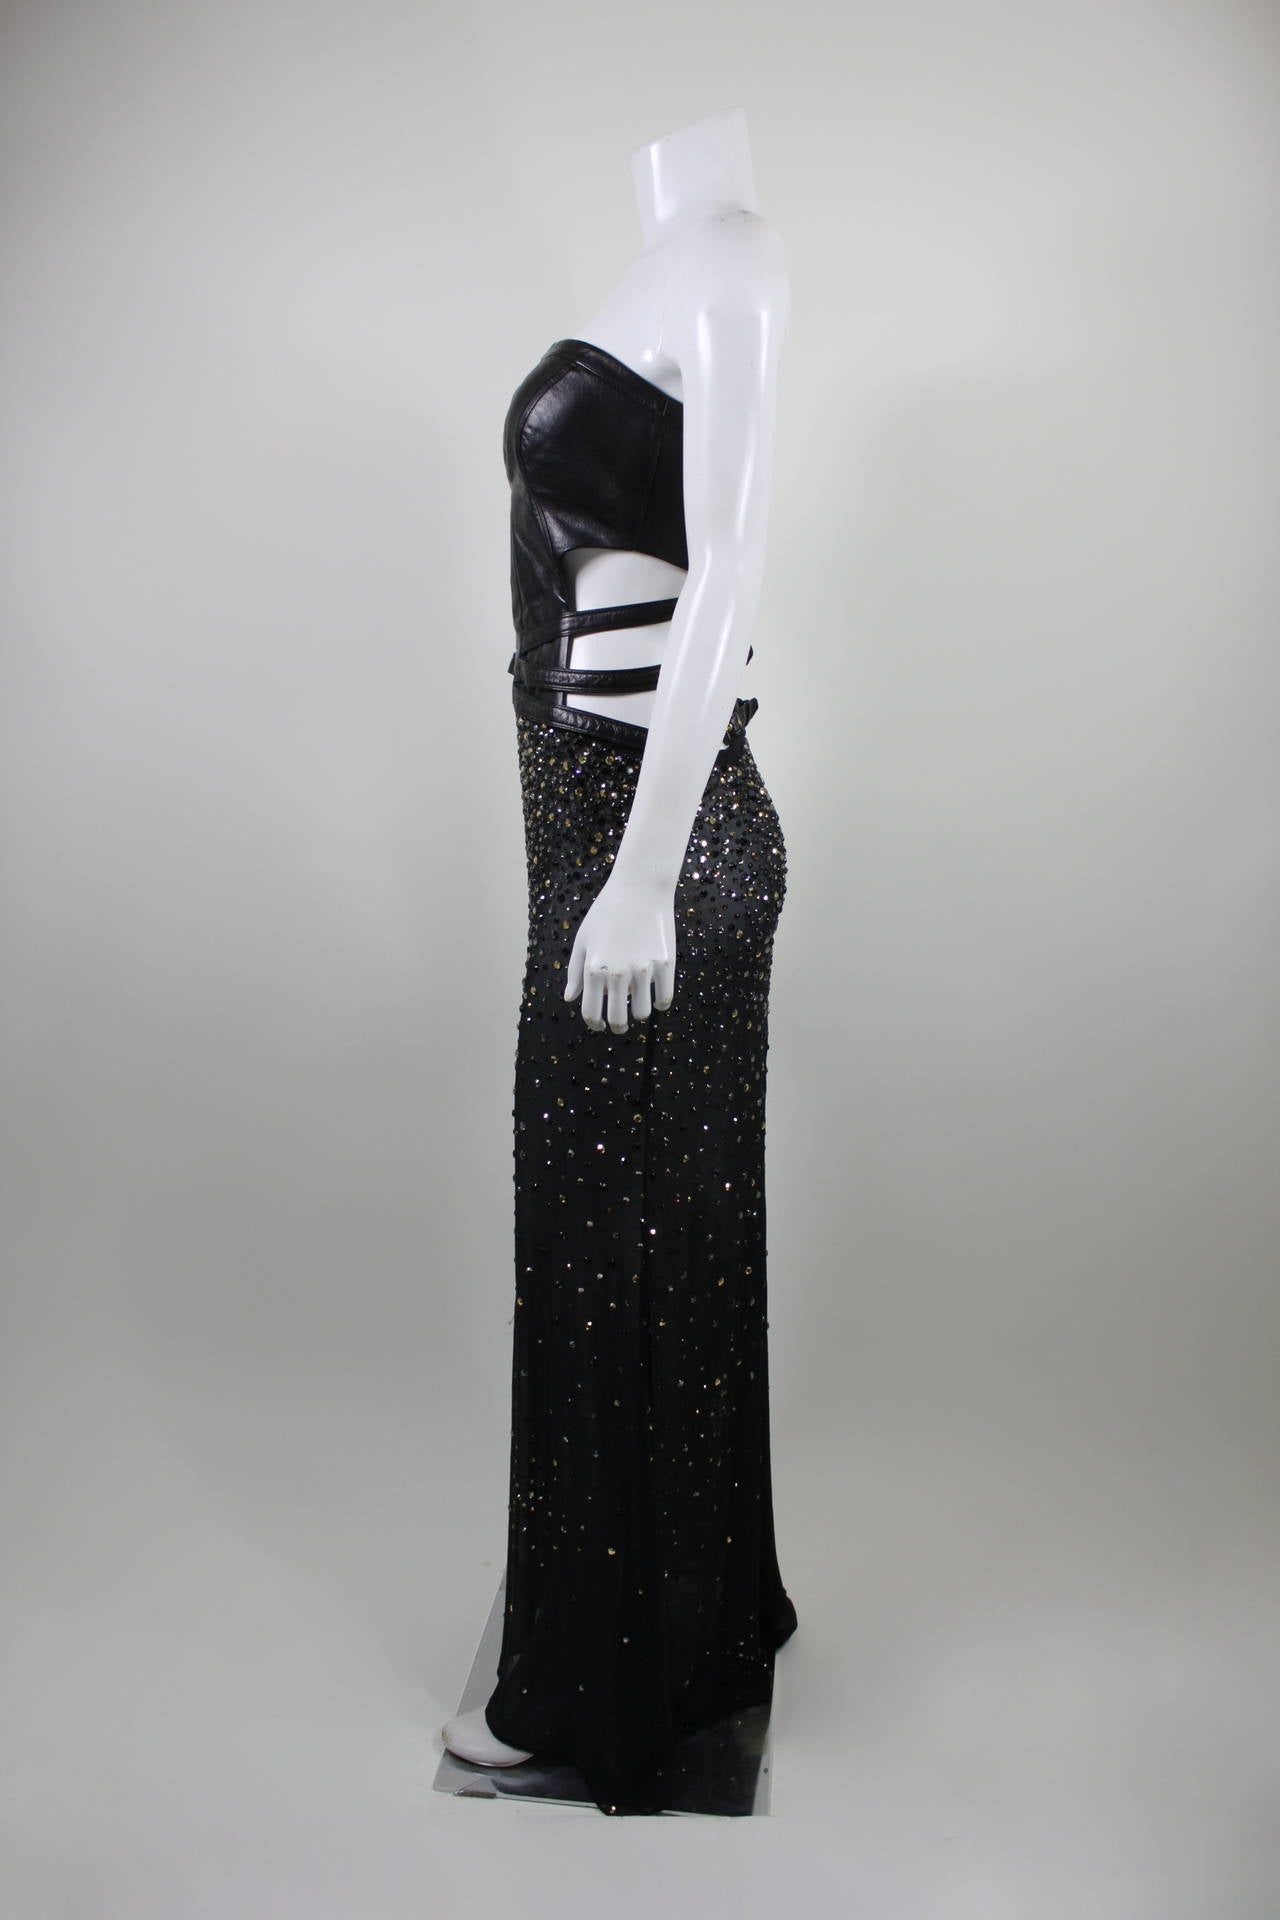 Gianni Versace Black Leather, Rhinestone and Chiffon Evening Gown In Excellent Condition For Sale In Los Angeles, CA